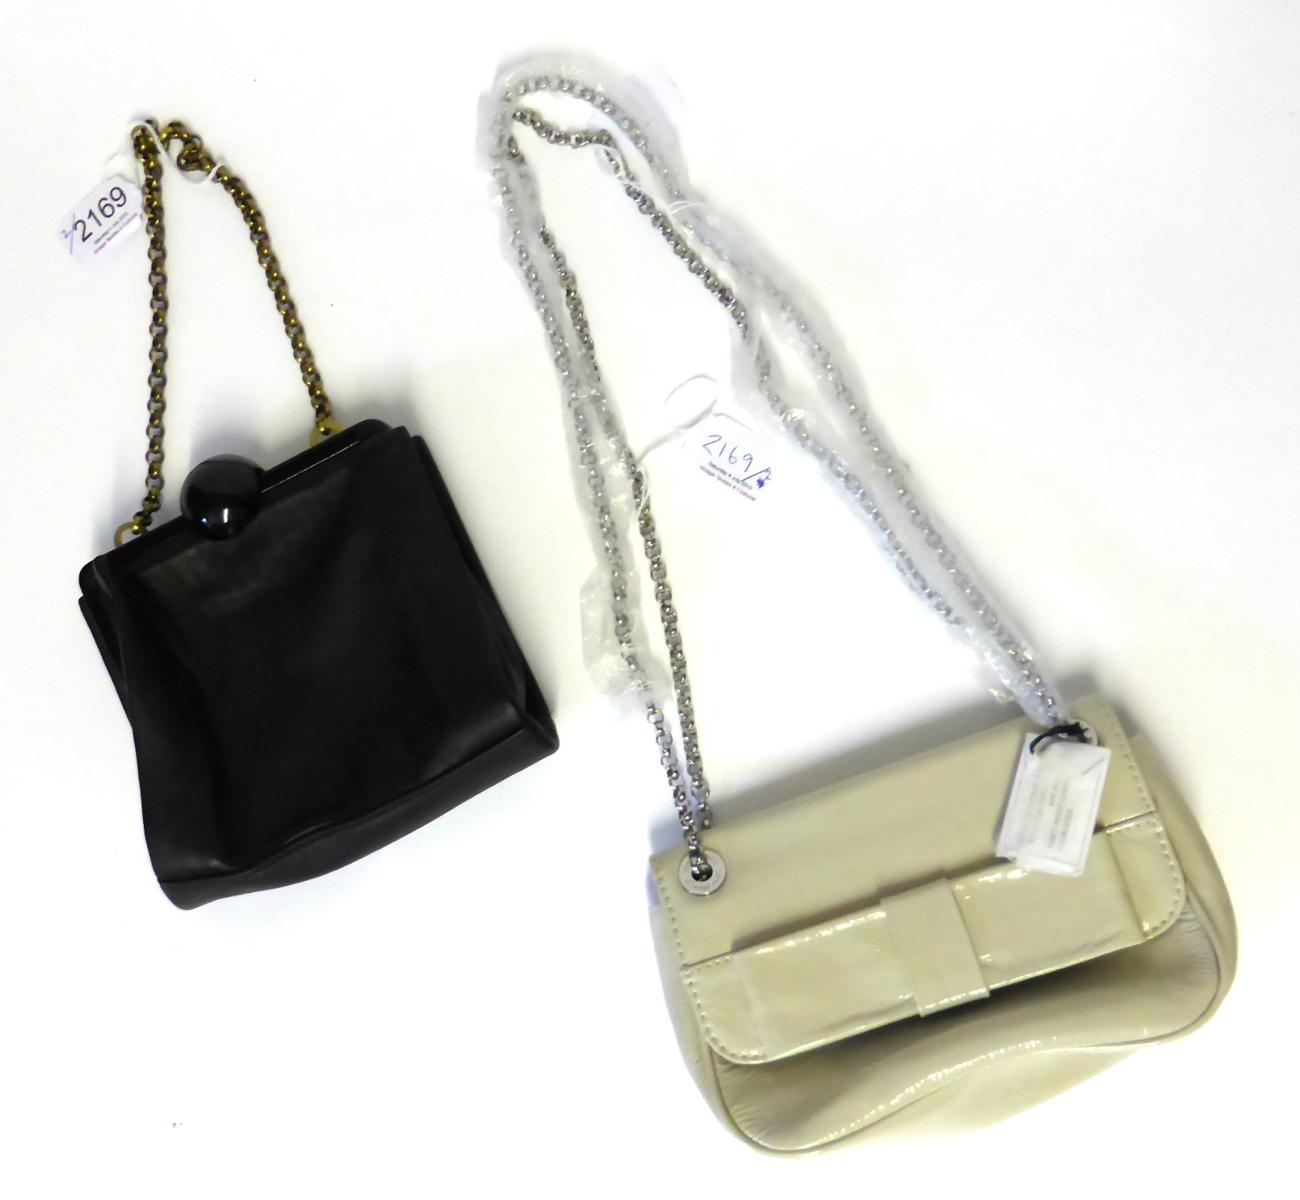 Lulu Guinness Cream Patent Anna Bow Bag with chain link shoulder strap, red lips on black printed